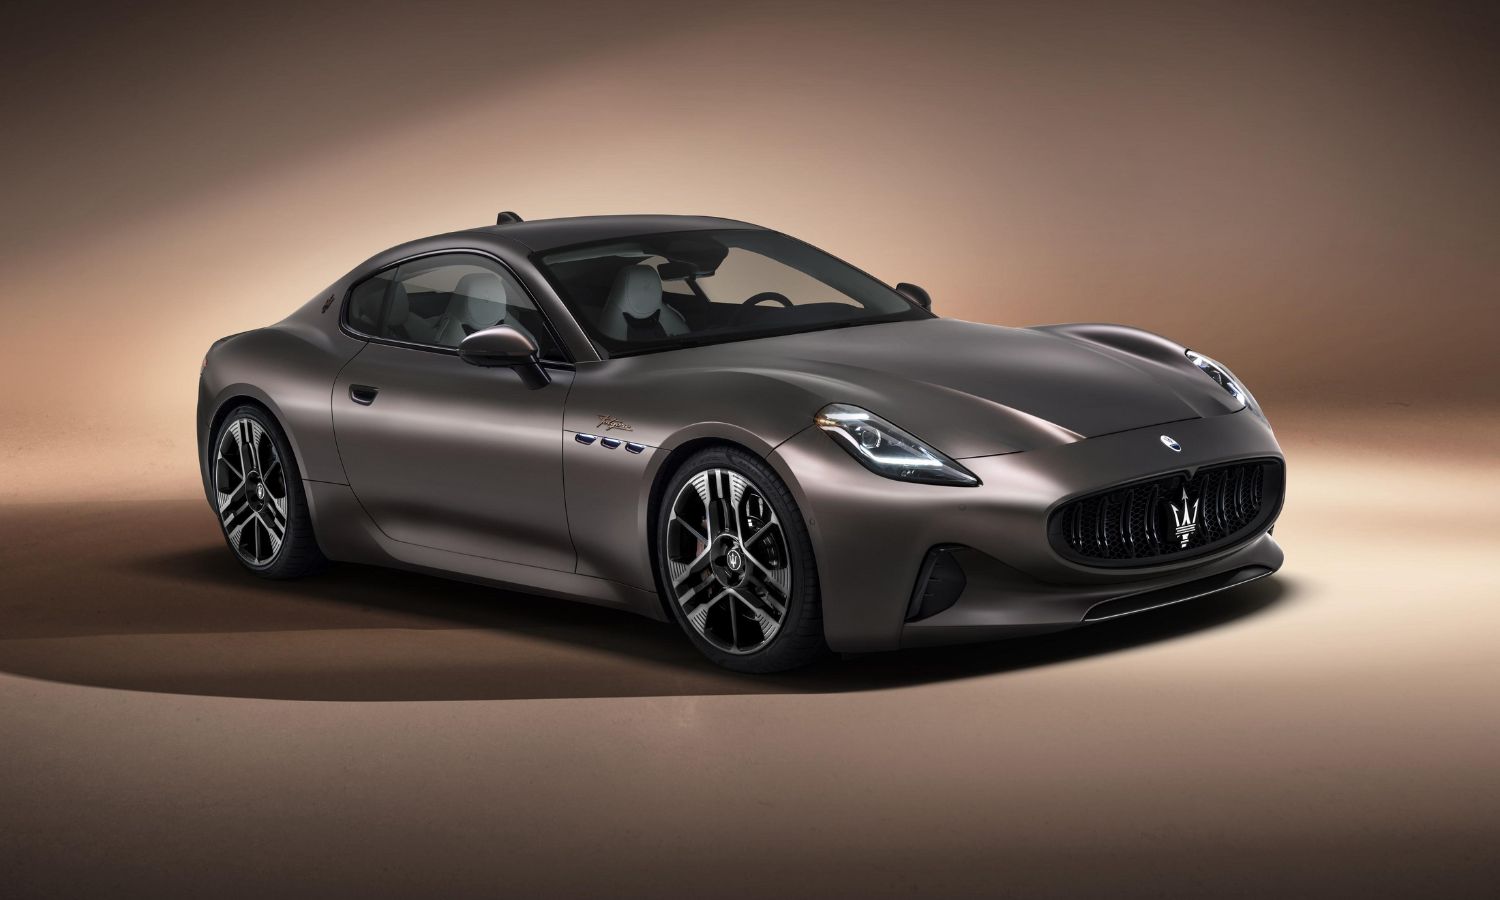 An image showing the Maserati GranTurismo Folgore, one of the best Luxury EV Cars in Australia